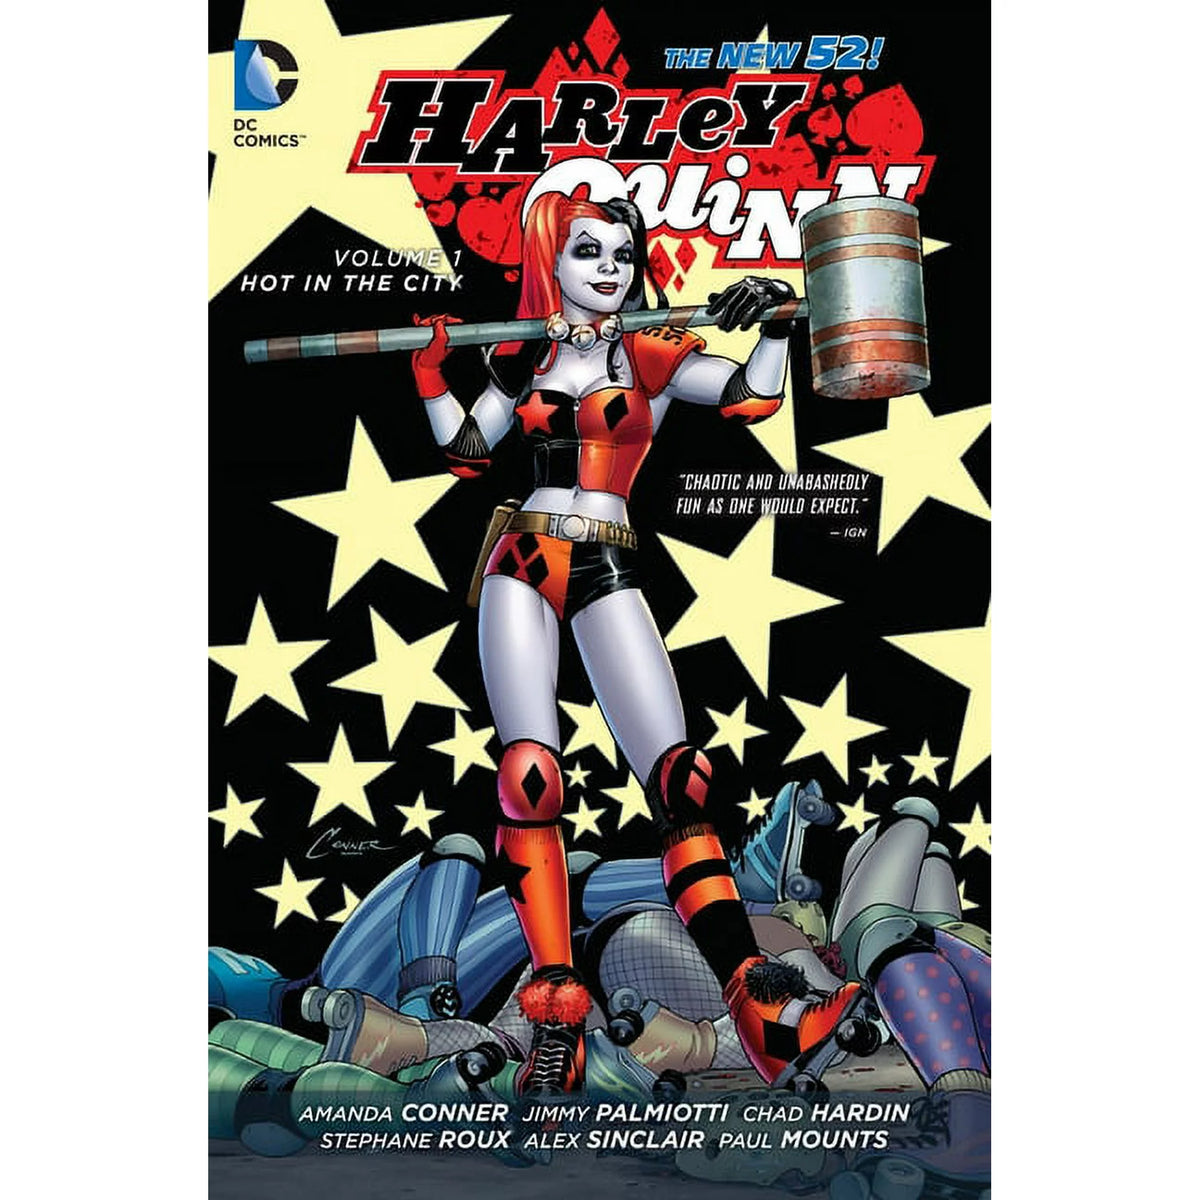 Harley Quinn Vol. 1: Hot in the City (the New 52) (Series #01)